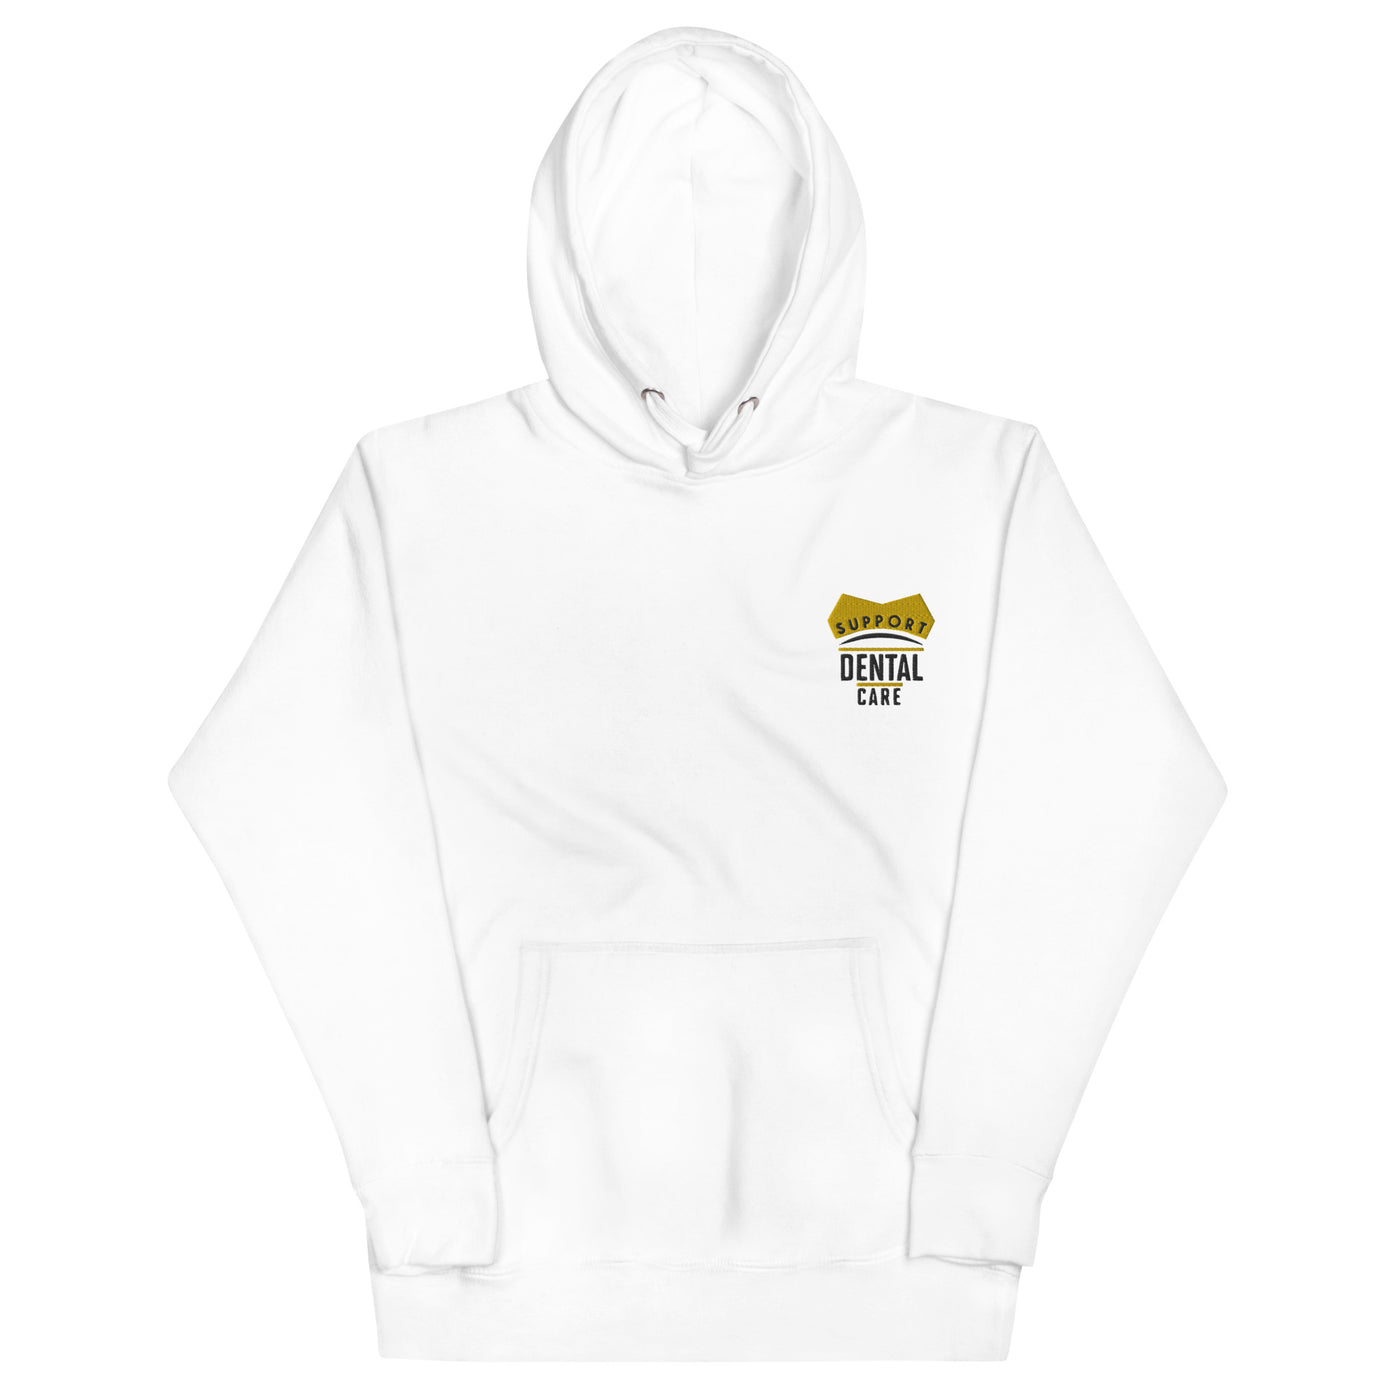 "Support Dental Care" Unisex Hoodie - Smile